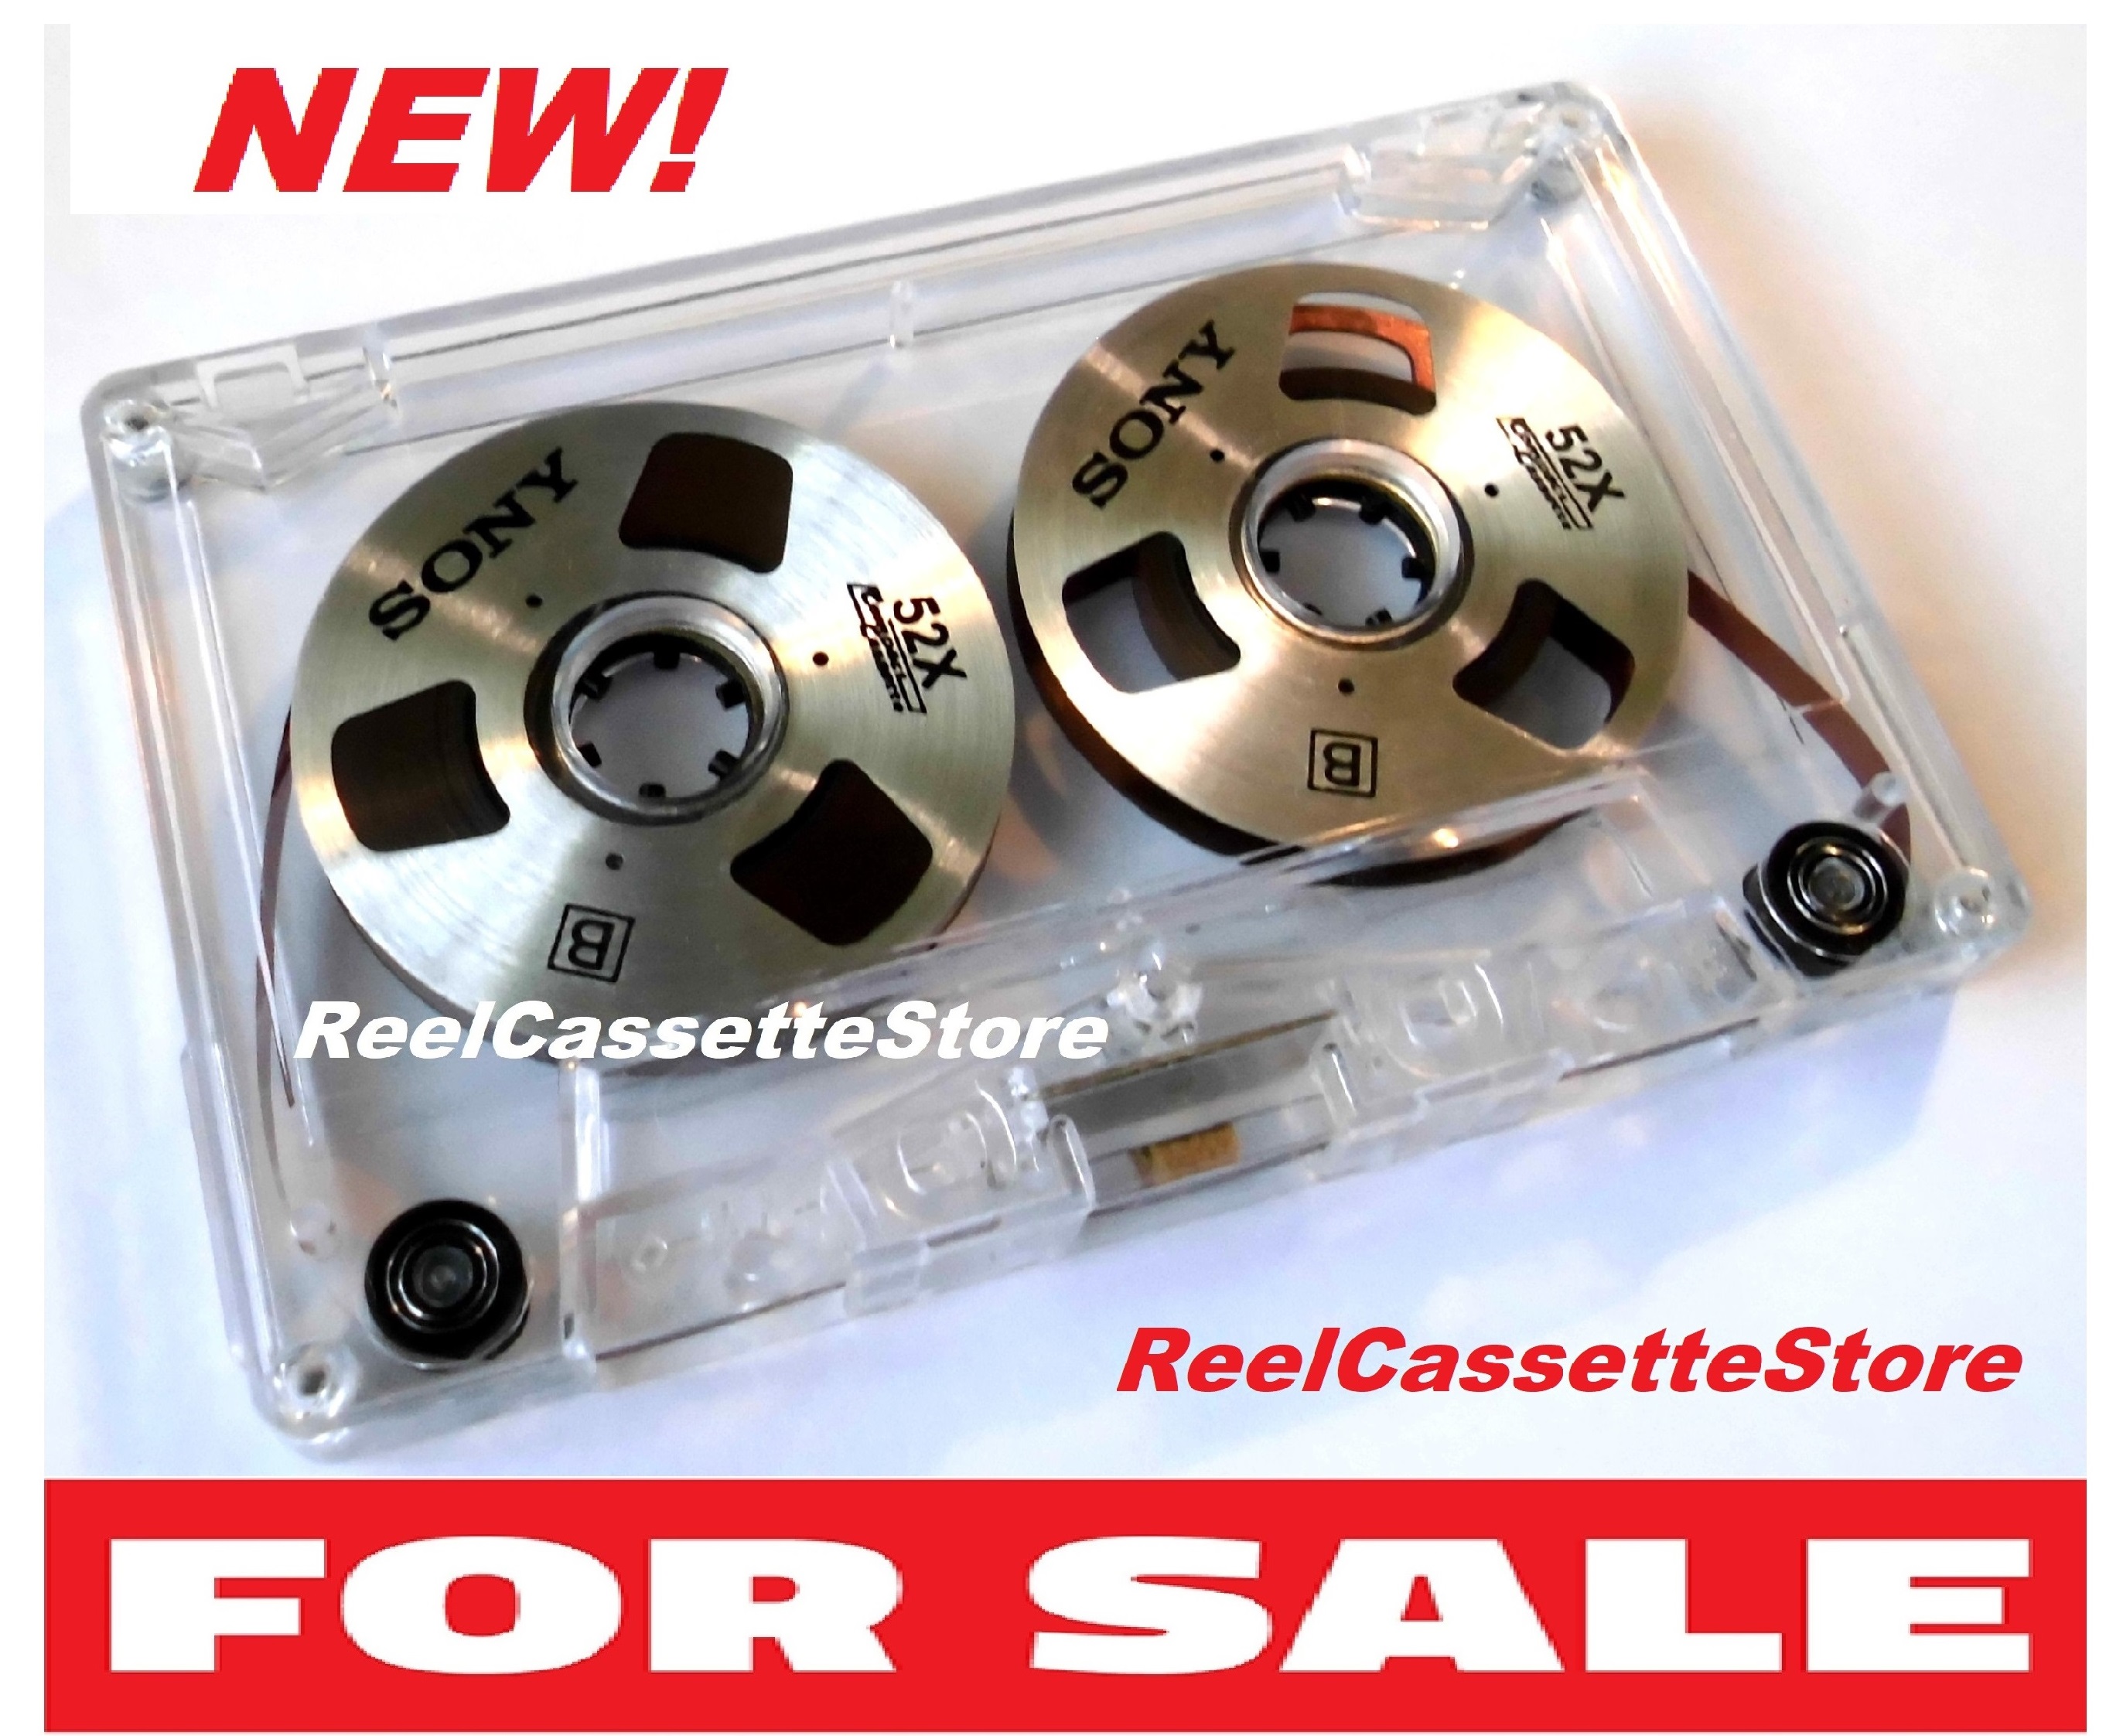 Reel Cassette Store on X: International Trackable Shipping PayPal accepted  For orders click the link below  #reelcassette #teac  #audiocassette #sharp #boombox #vintagehifi #tapedeck #ghettoblaster  #pioneer #sanyo #walkman #TDK